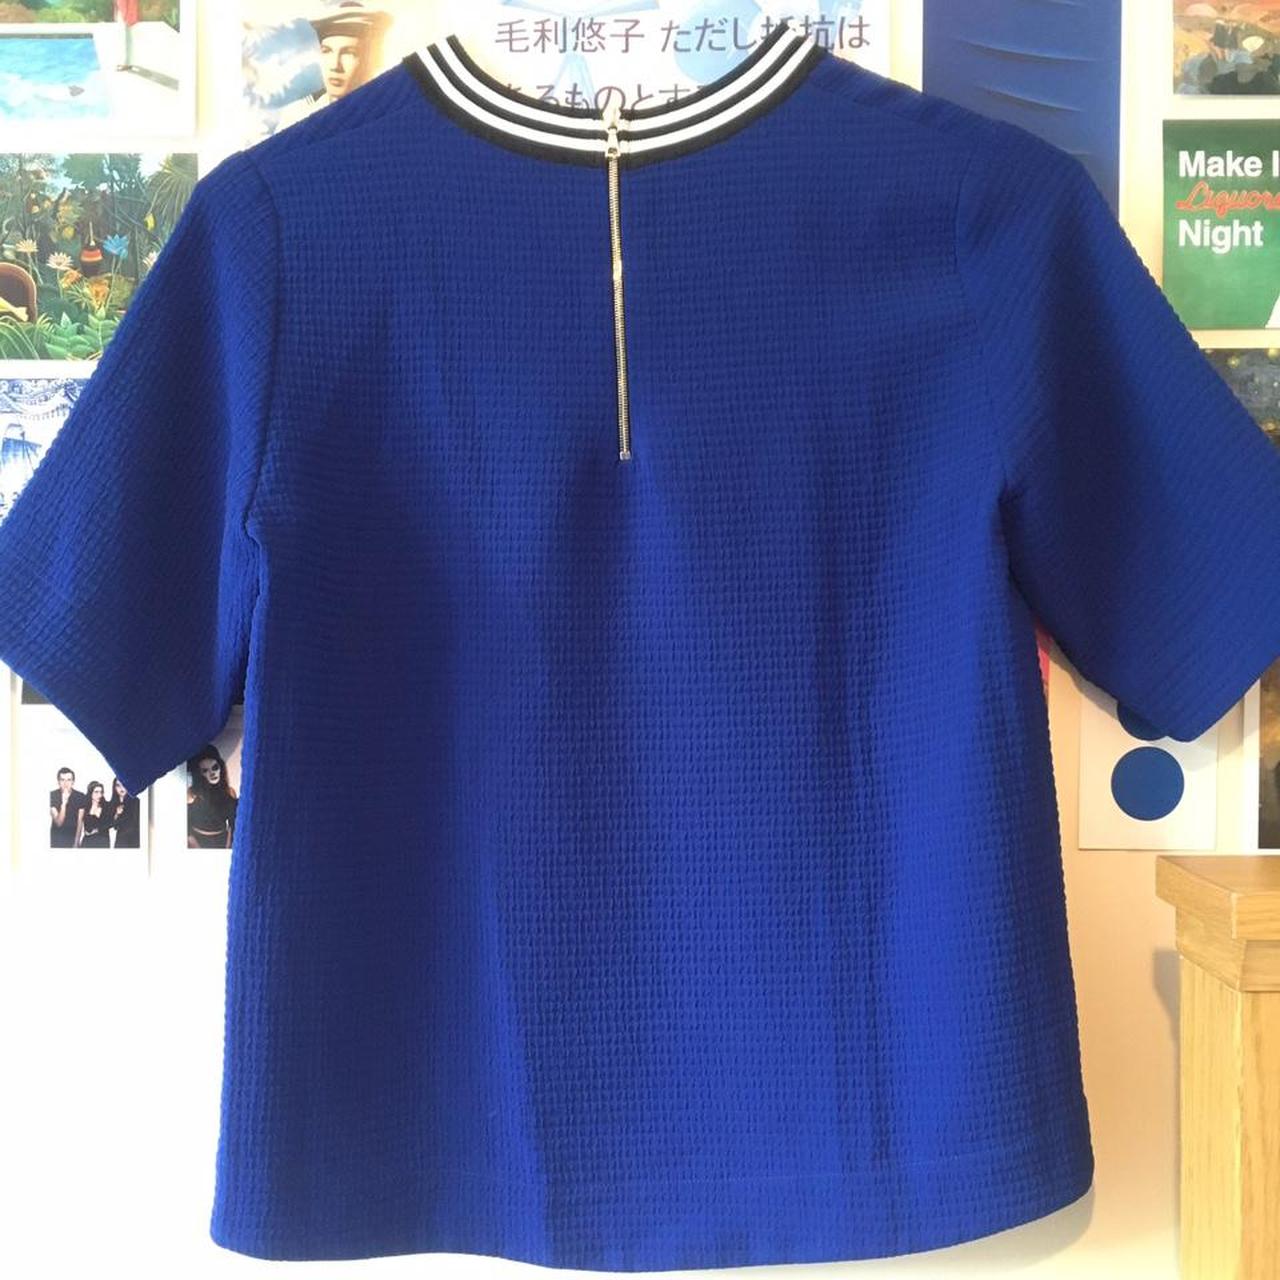 Product Image 3 - Cobalt blue textured Sandro top
A